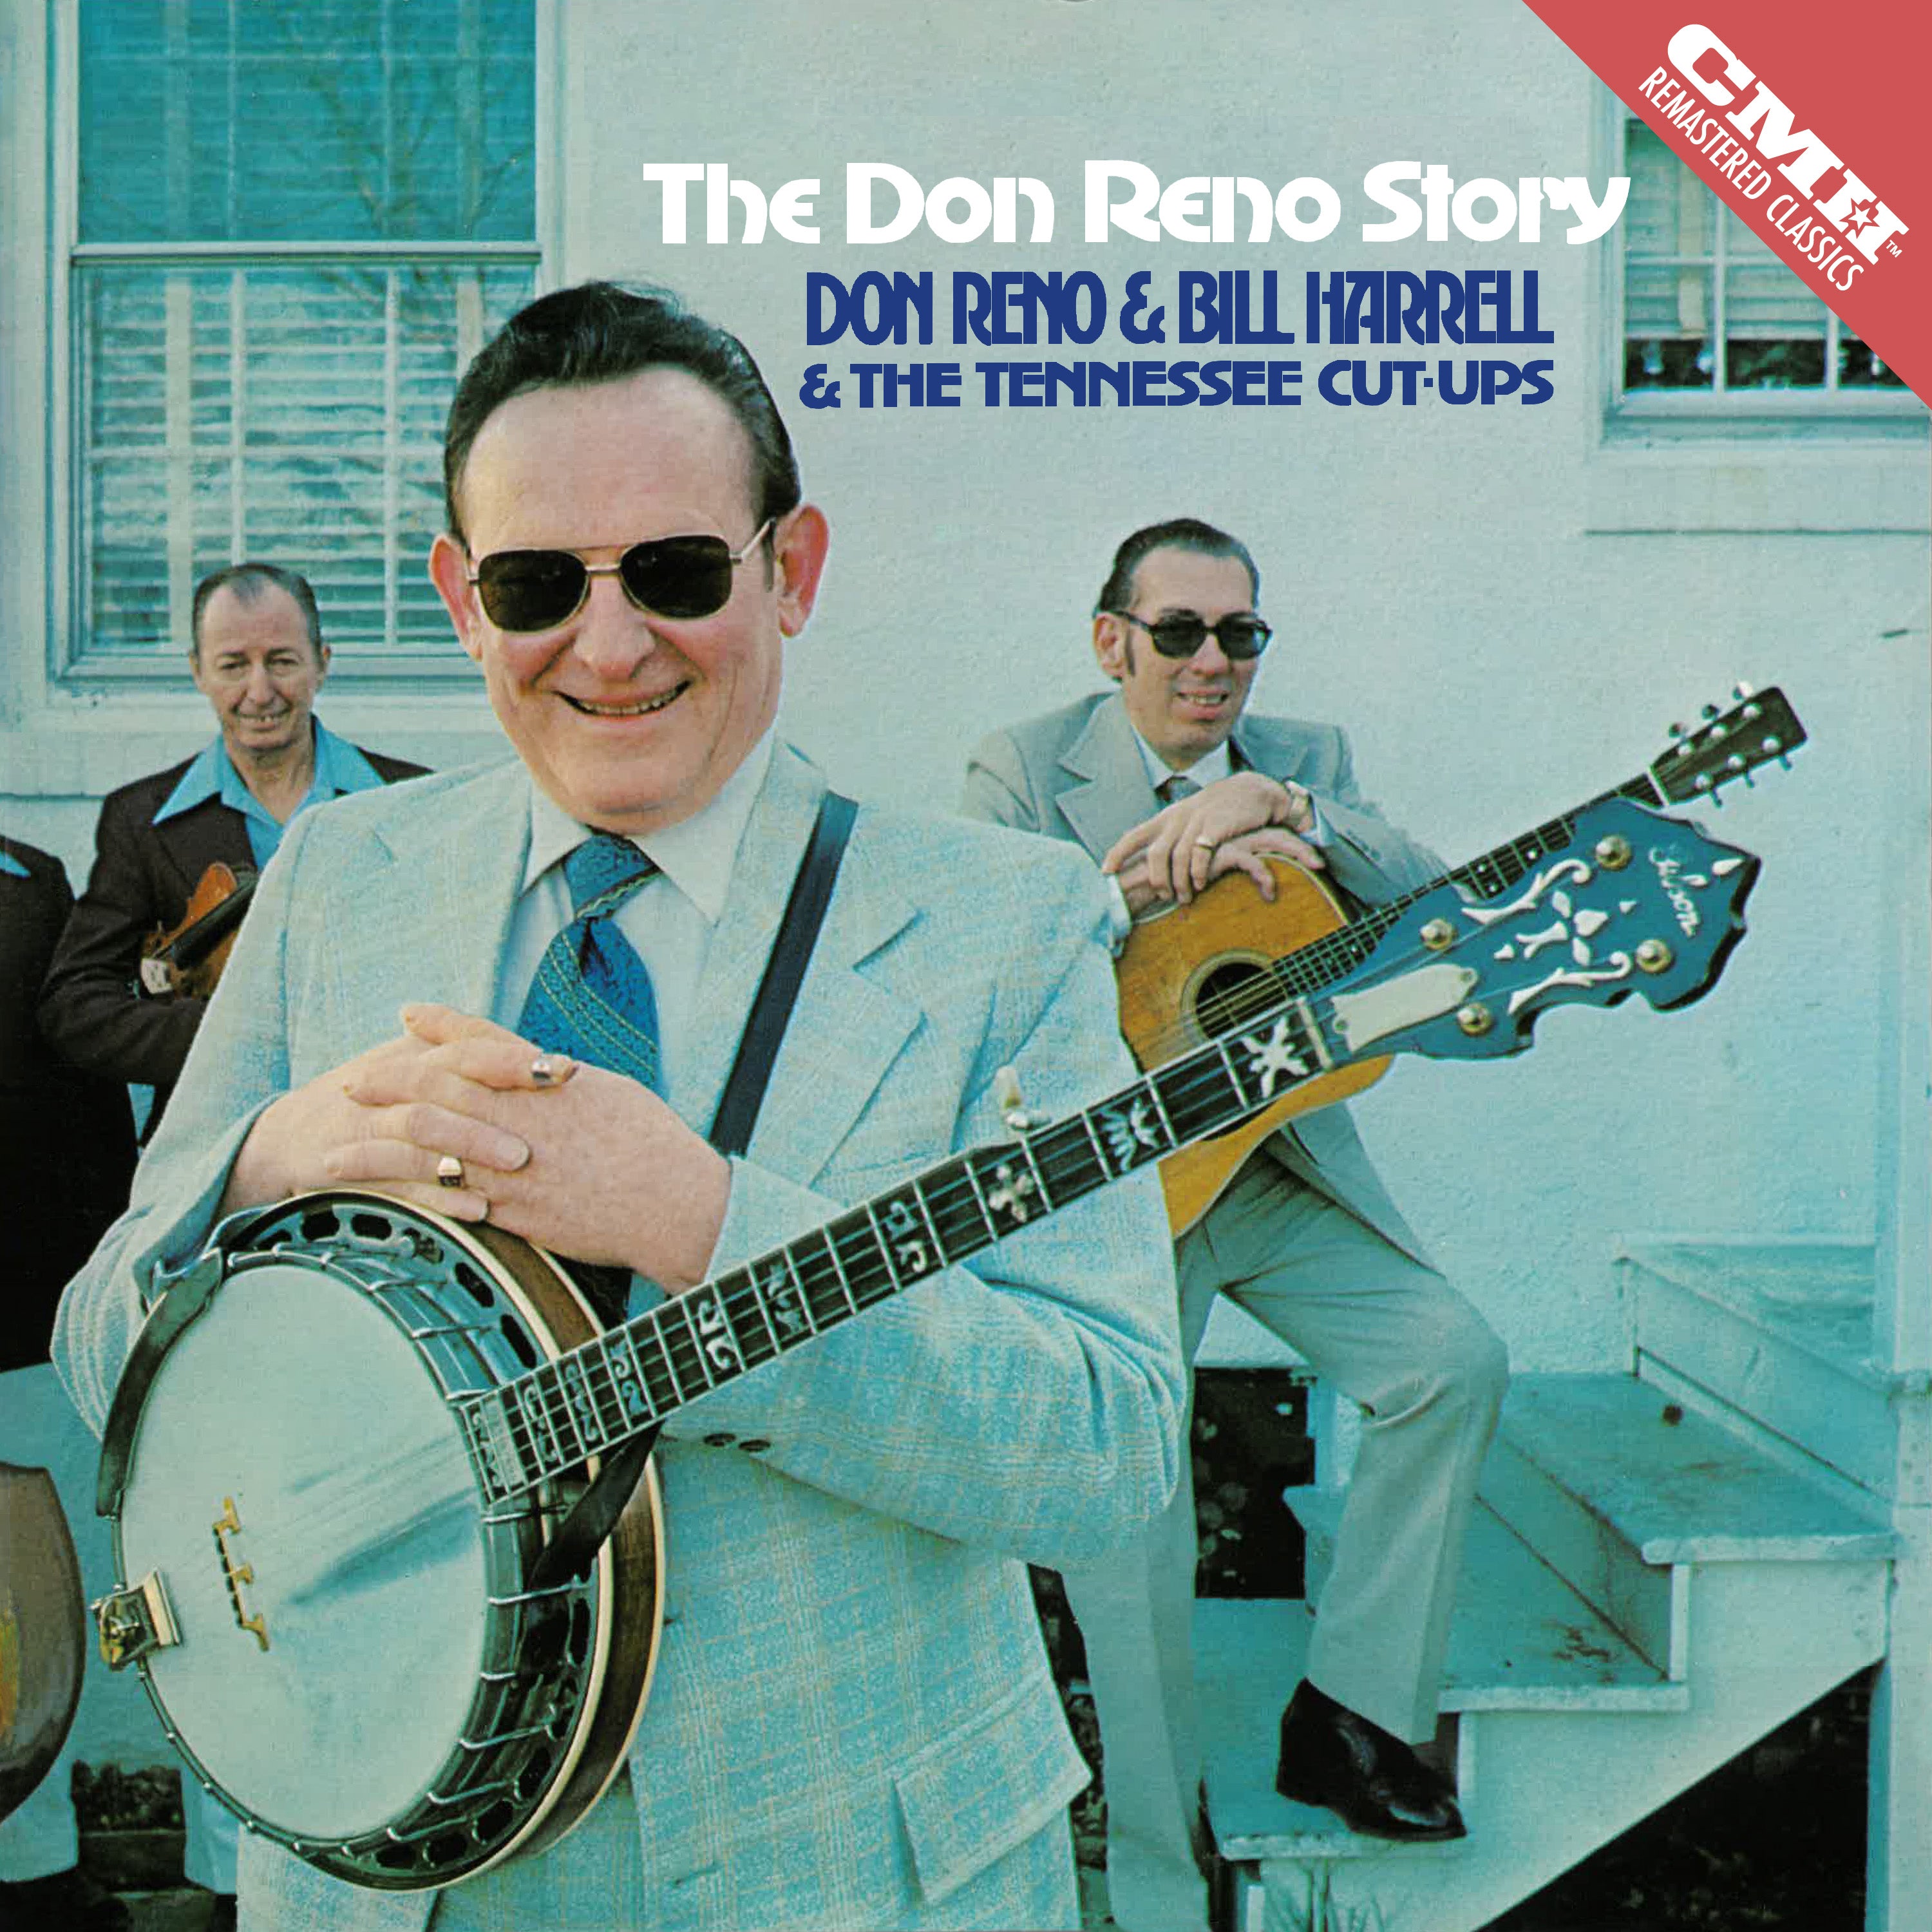 The Don Reno Story: First time digital release